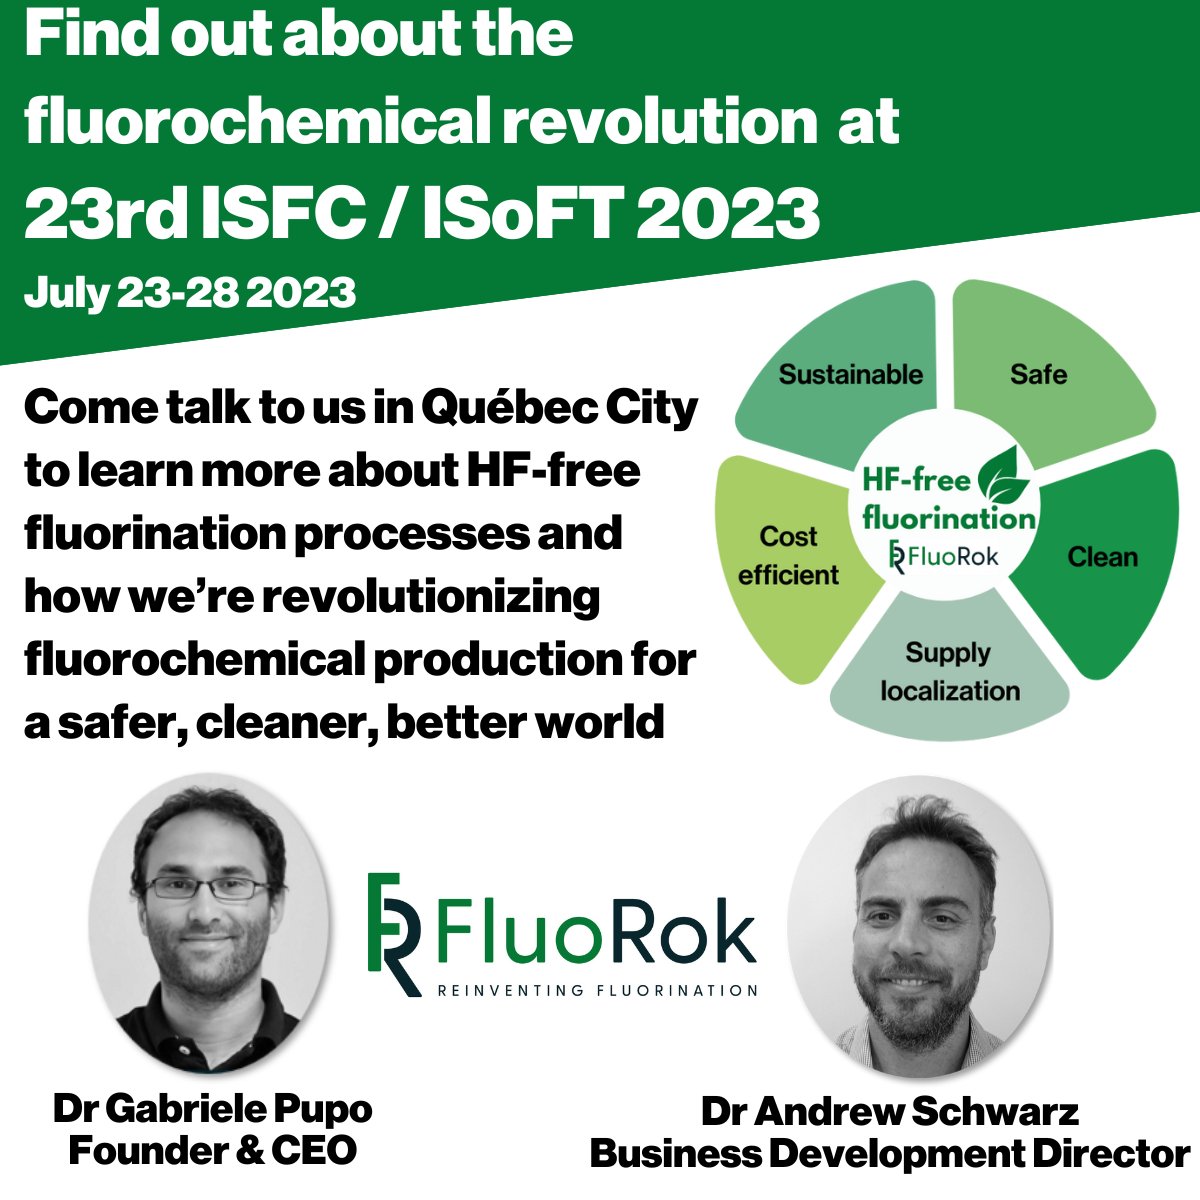 Want to find out more about the fluorochemical revolution and HF-free fluorination processes? Join us next week at 23rd ISFC/ISoFT ‘23in Québec City. Come talk to us on our stand....À bientôt!🍁 isfc2023.org #fluoRok #fluo_Rok #fluorination #fluorochemicalrevolution